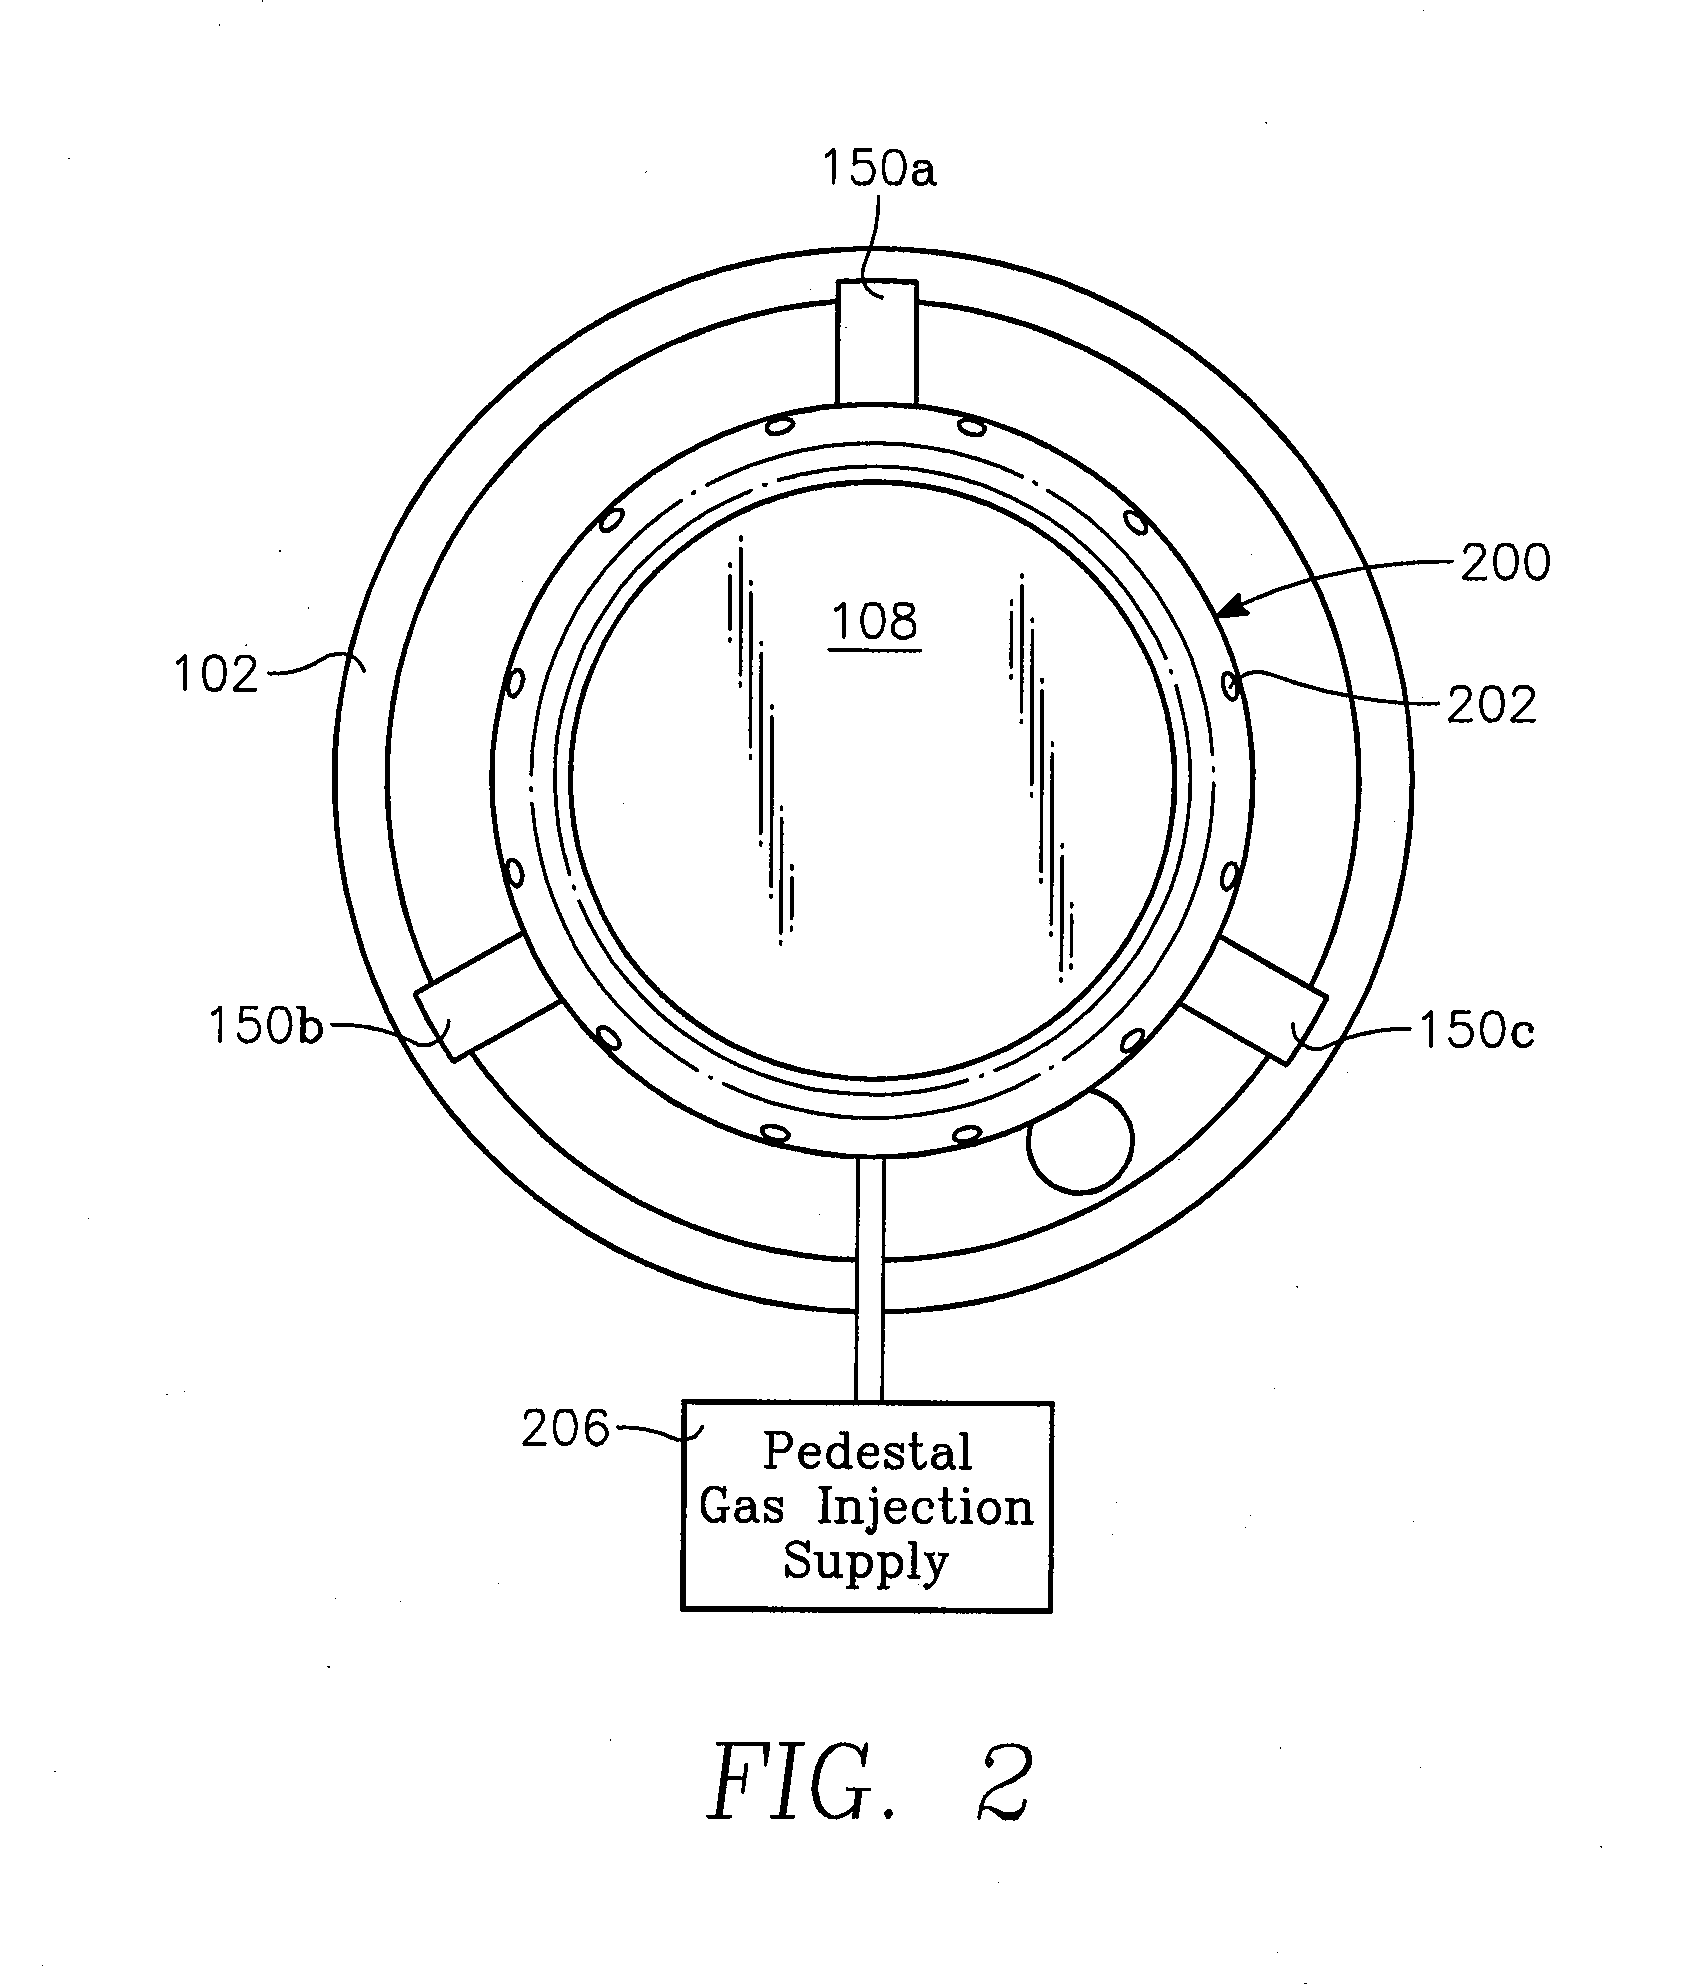 Plasma immersion ion implantation with highly uniform chamber seasoning process for a toroidal source reactor